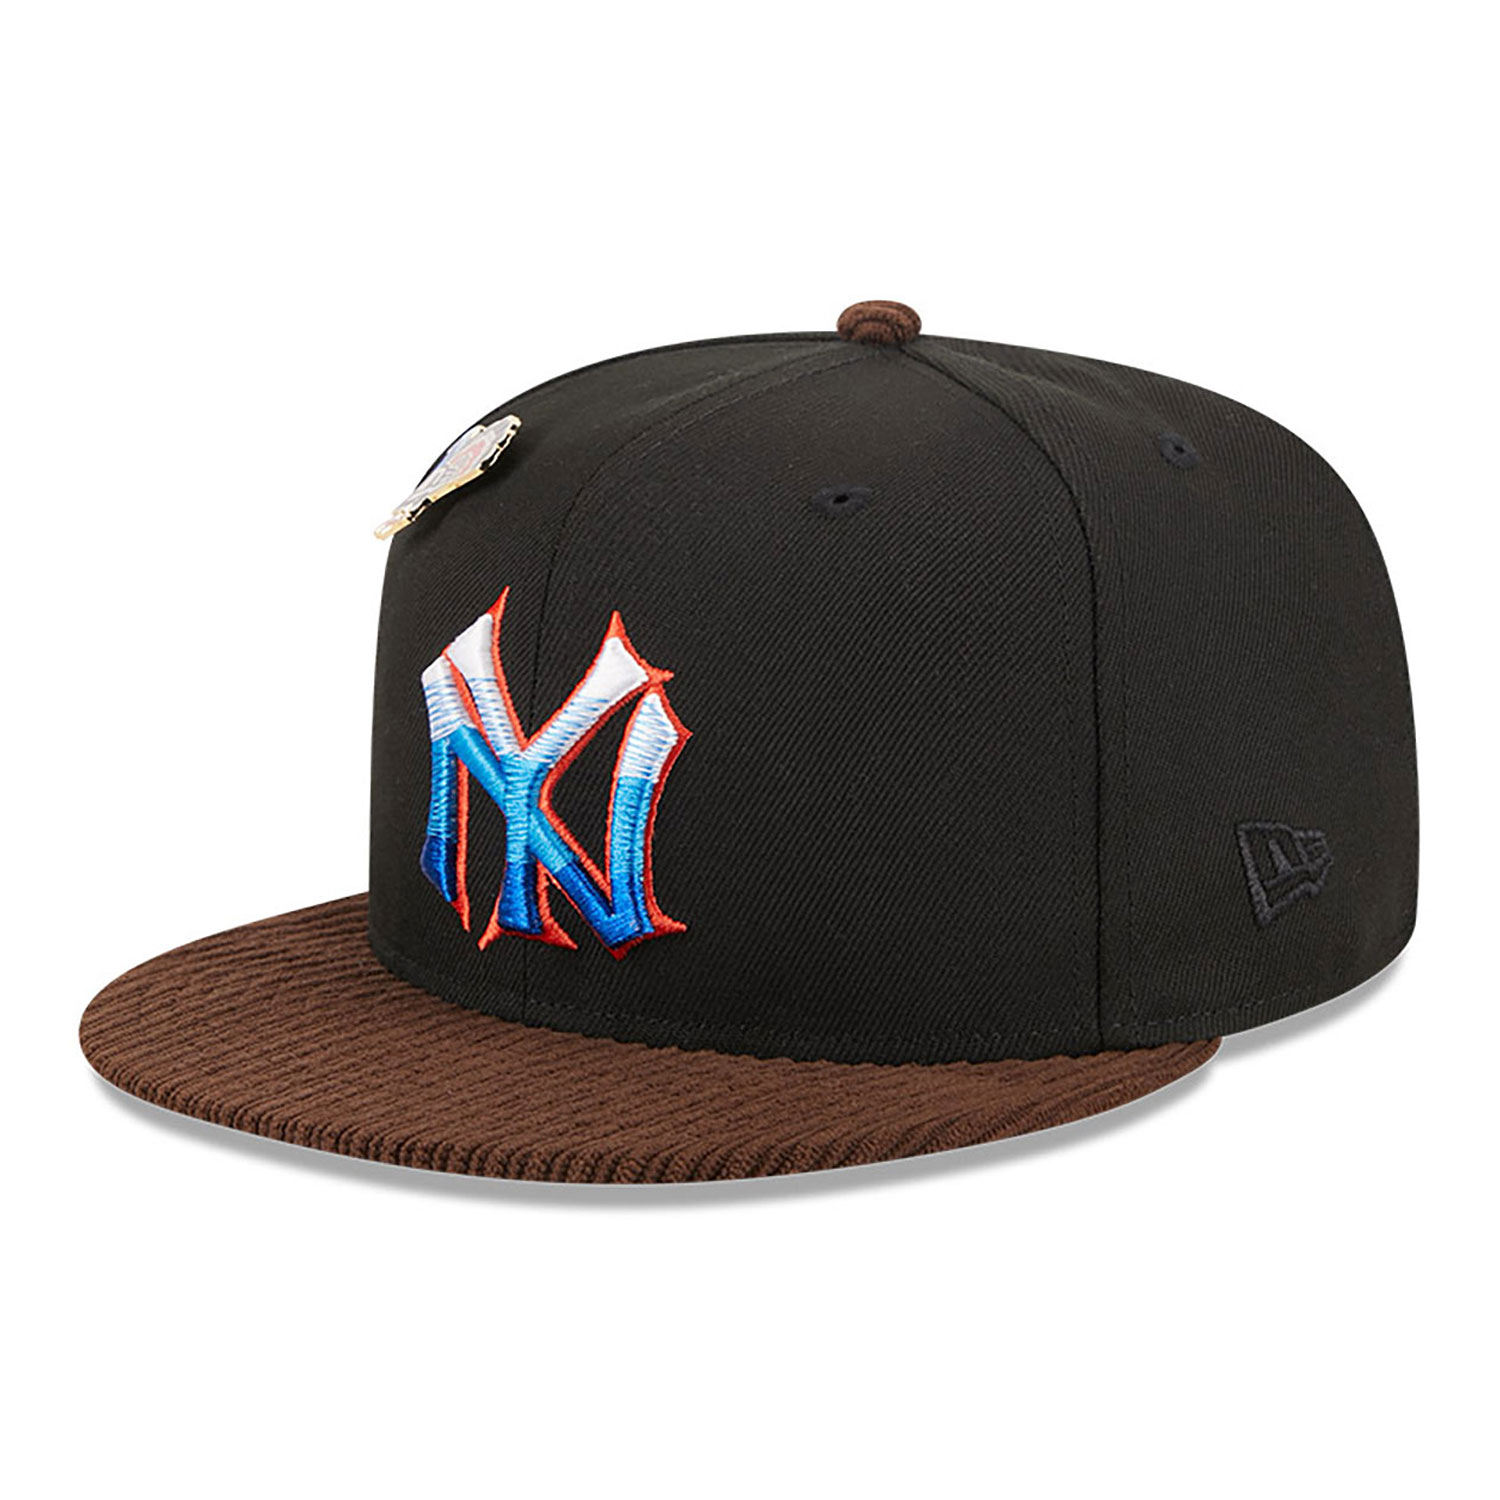 New York Yankees MLB Cooperstown Feathered Cord Black 59FIFTY Fitted Cap